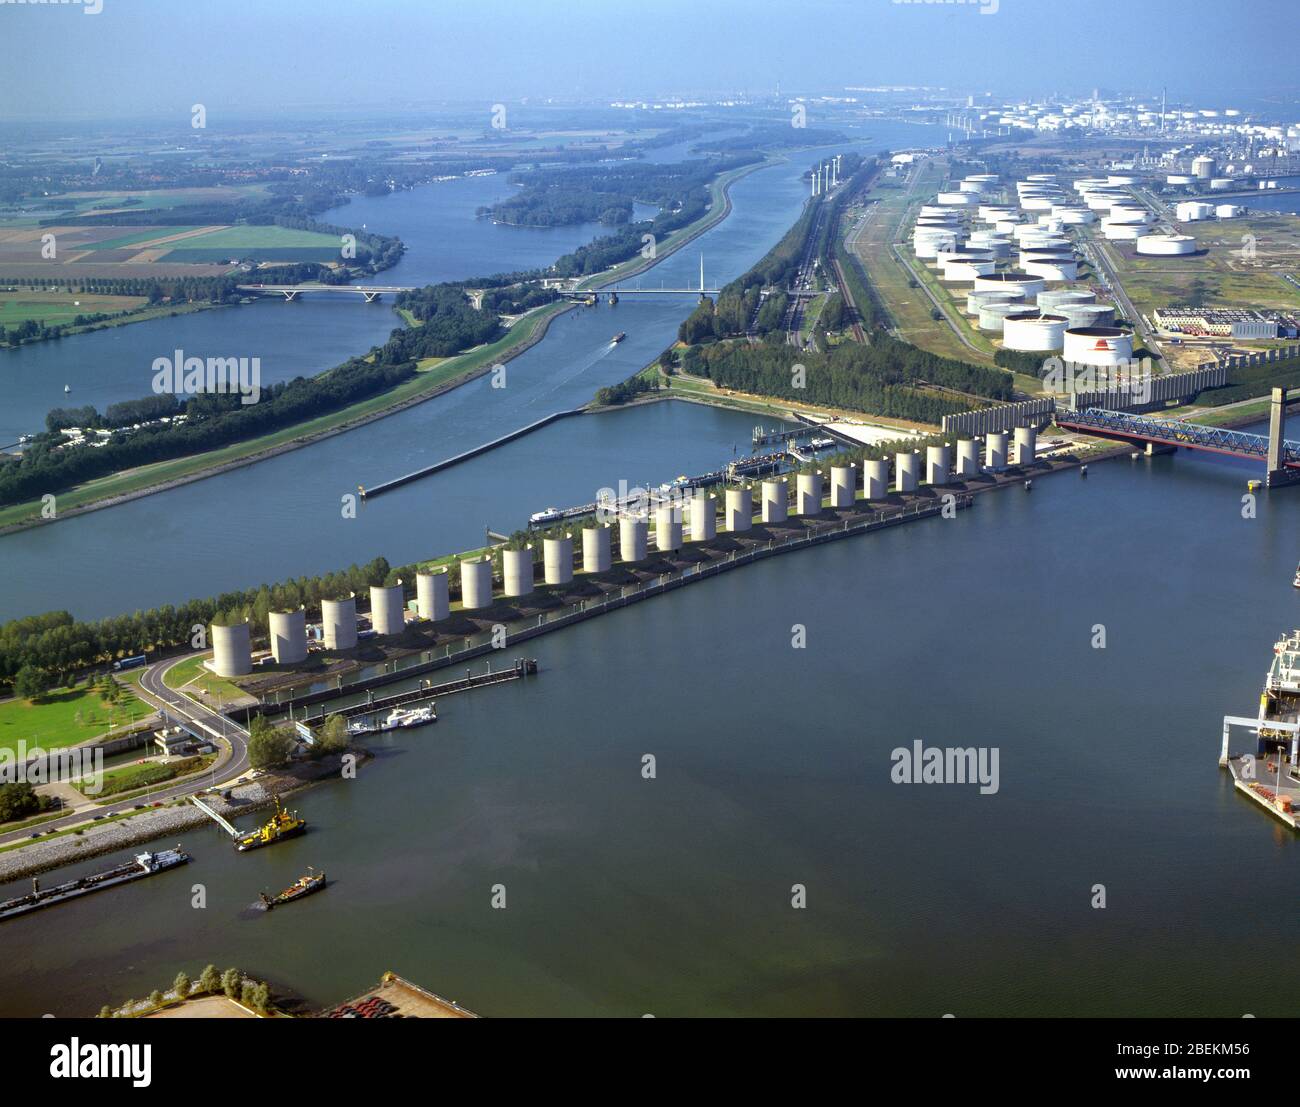 Rotterdam, Europoort, Holland, July 10 - 1997: Historical aerial photo of windscreen along the Caland canal to the Caland bridge designed by Maarten S Stock Photo